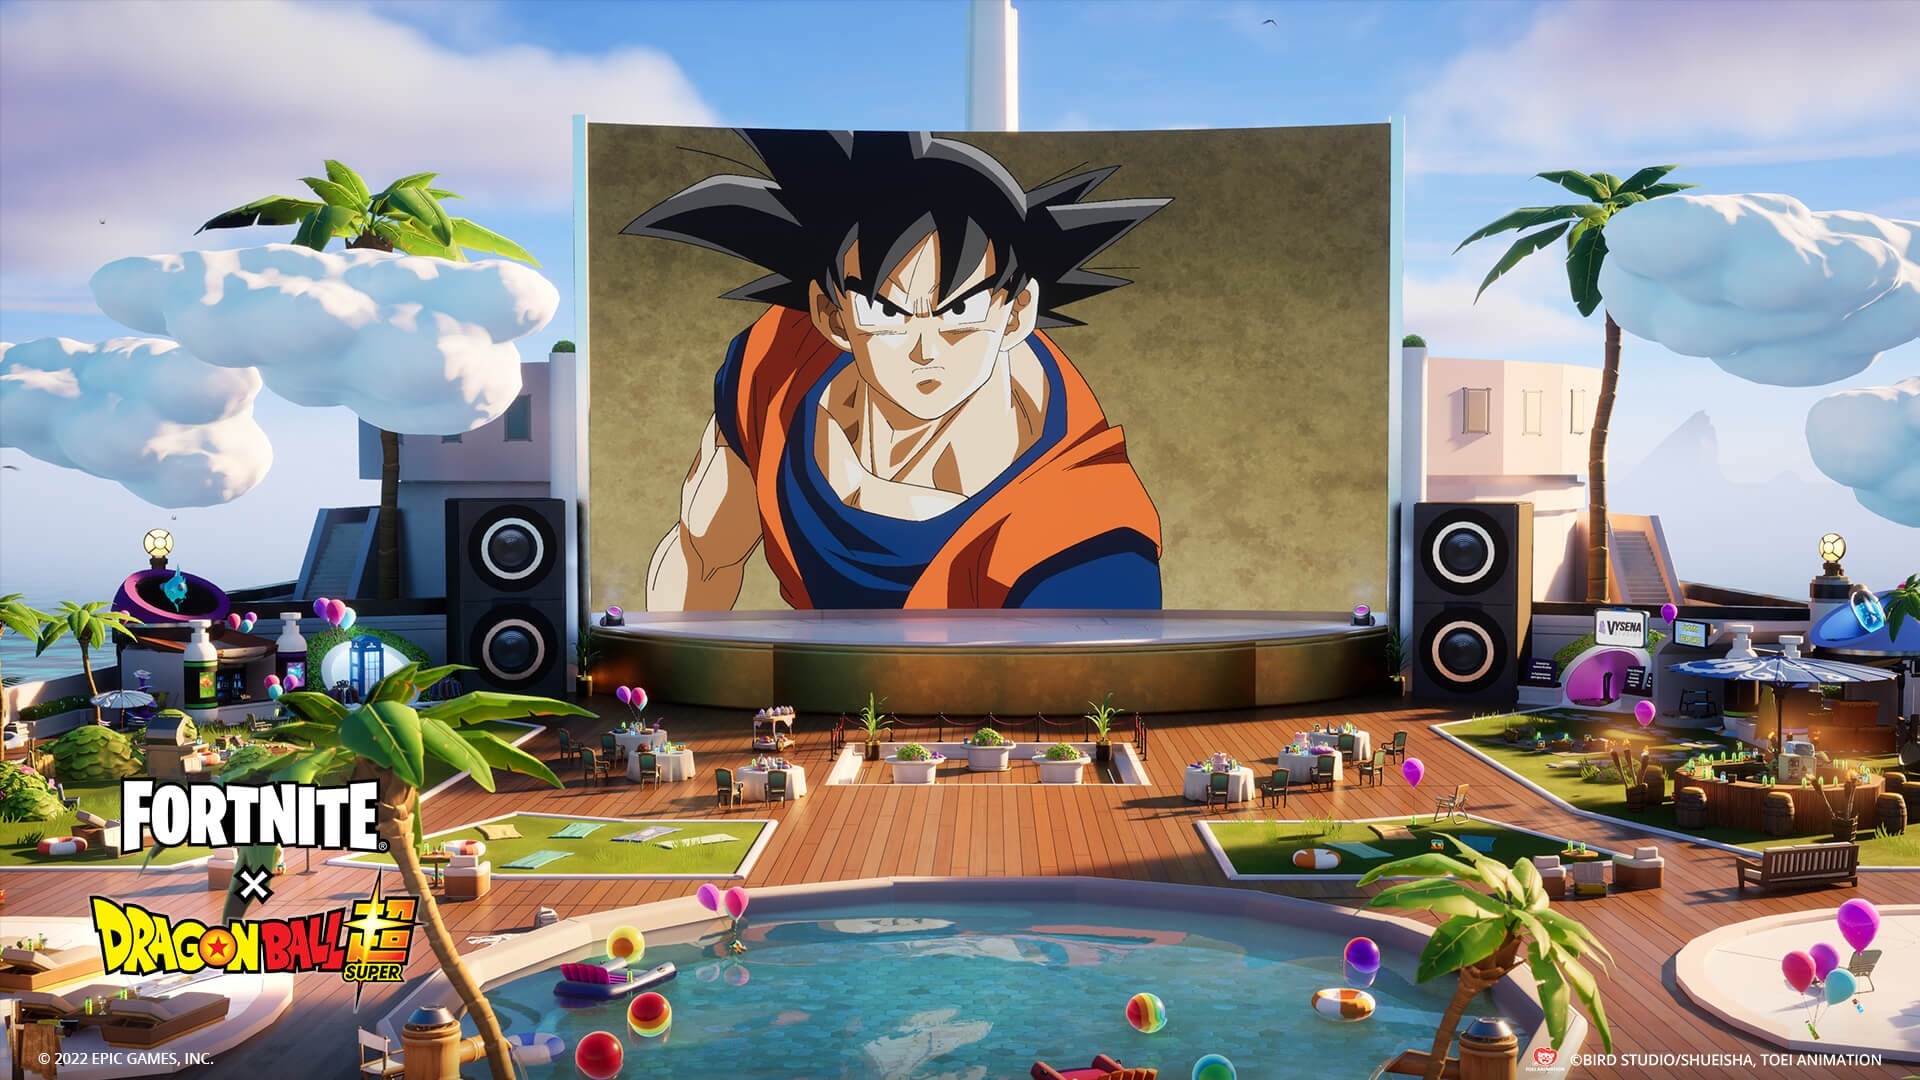 Fortnite x Dragon Ball crossover event adds Goku Vegeta to the game today |  VG247